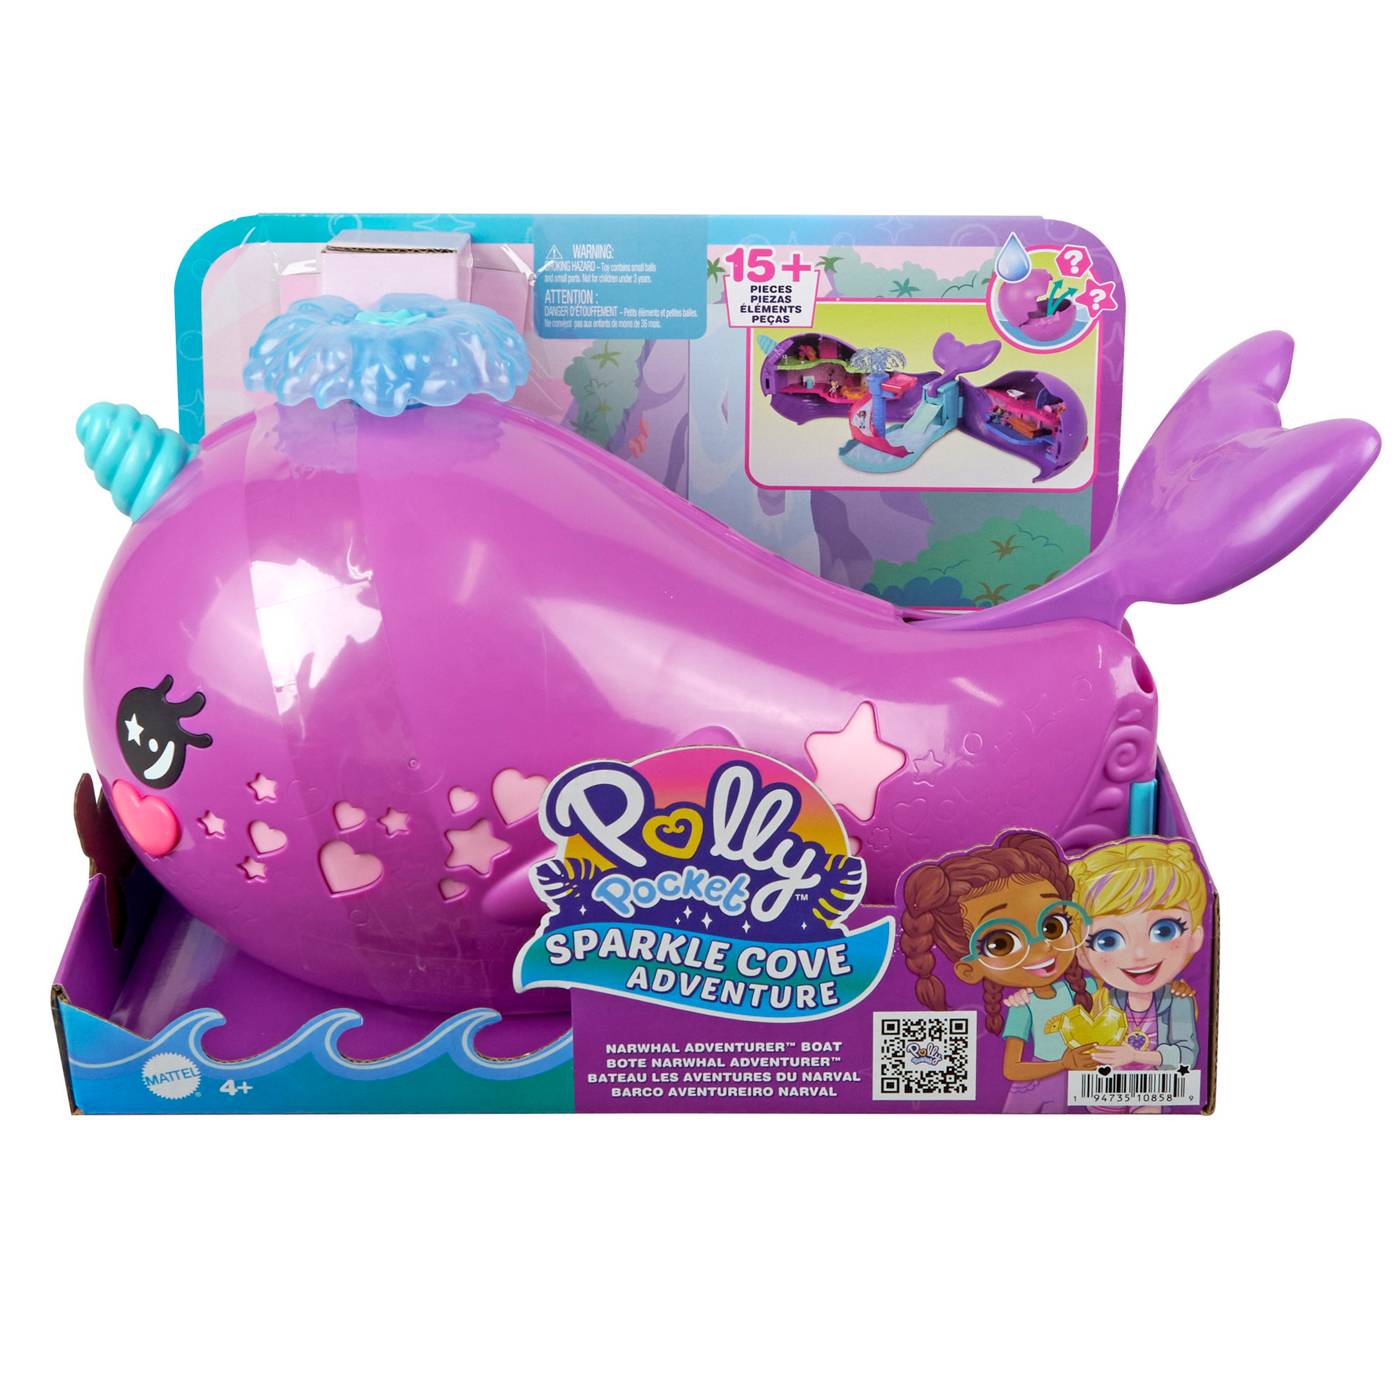 Polly Pocket Sparkle Cove Adventure Narwhal Boat Playset; image 1 of 3